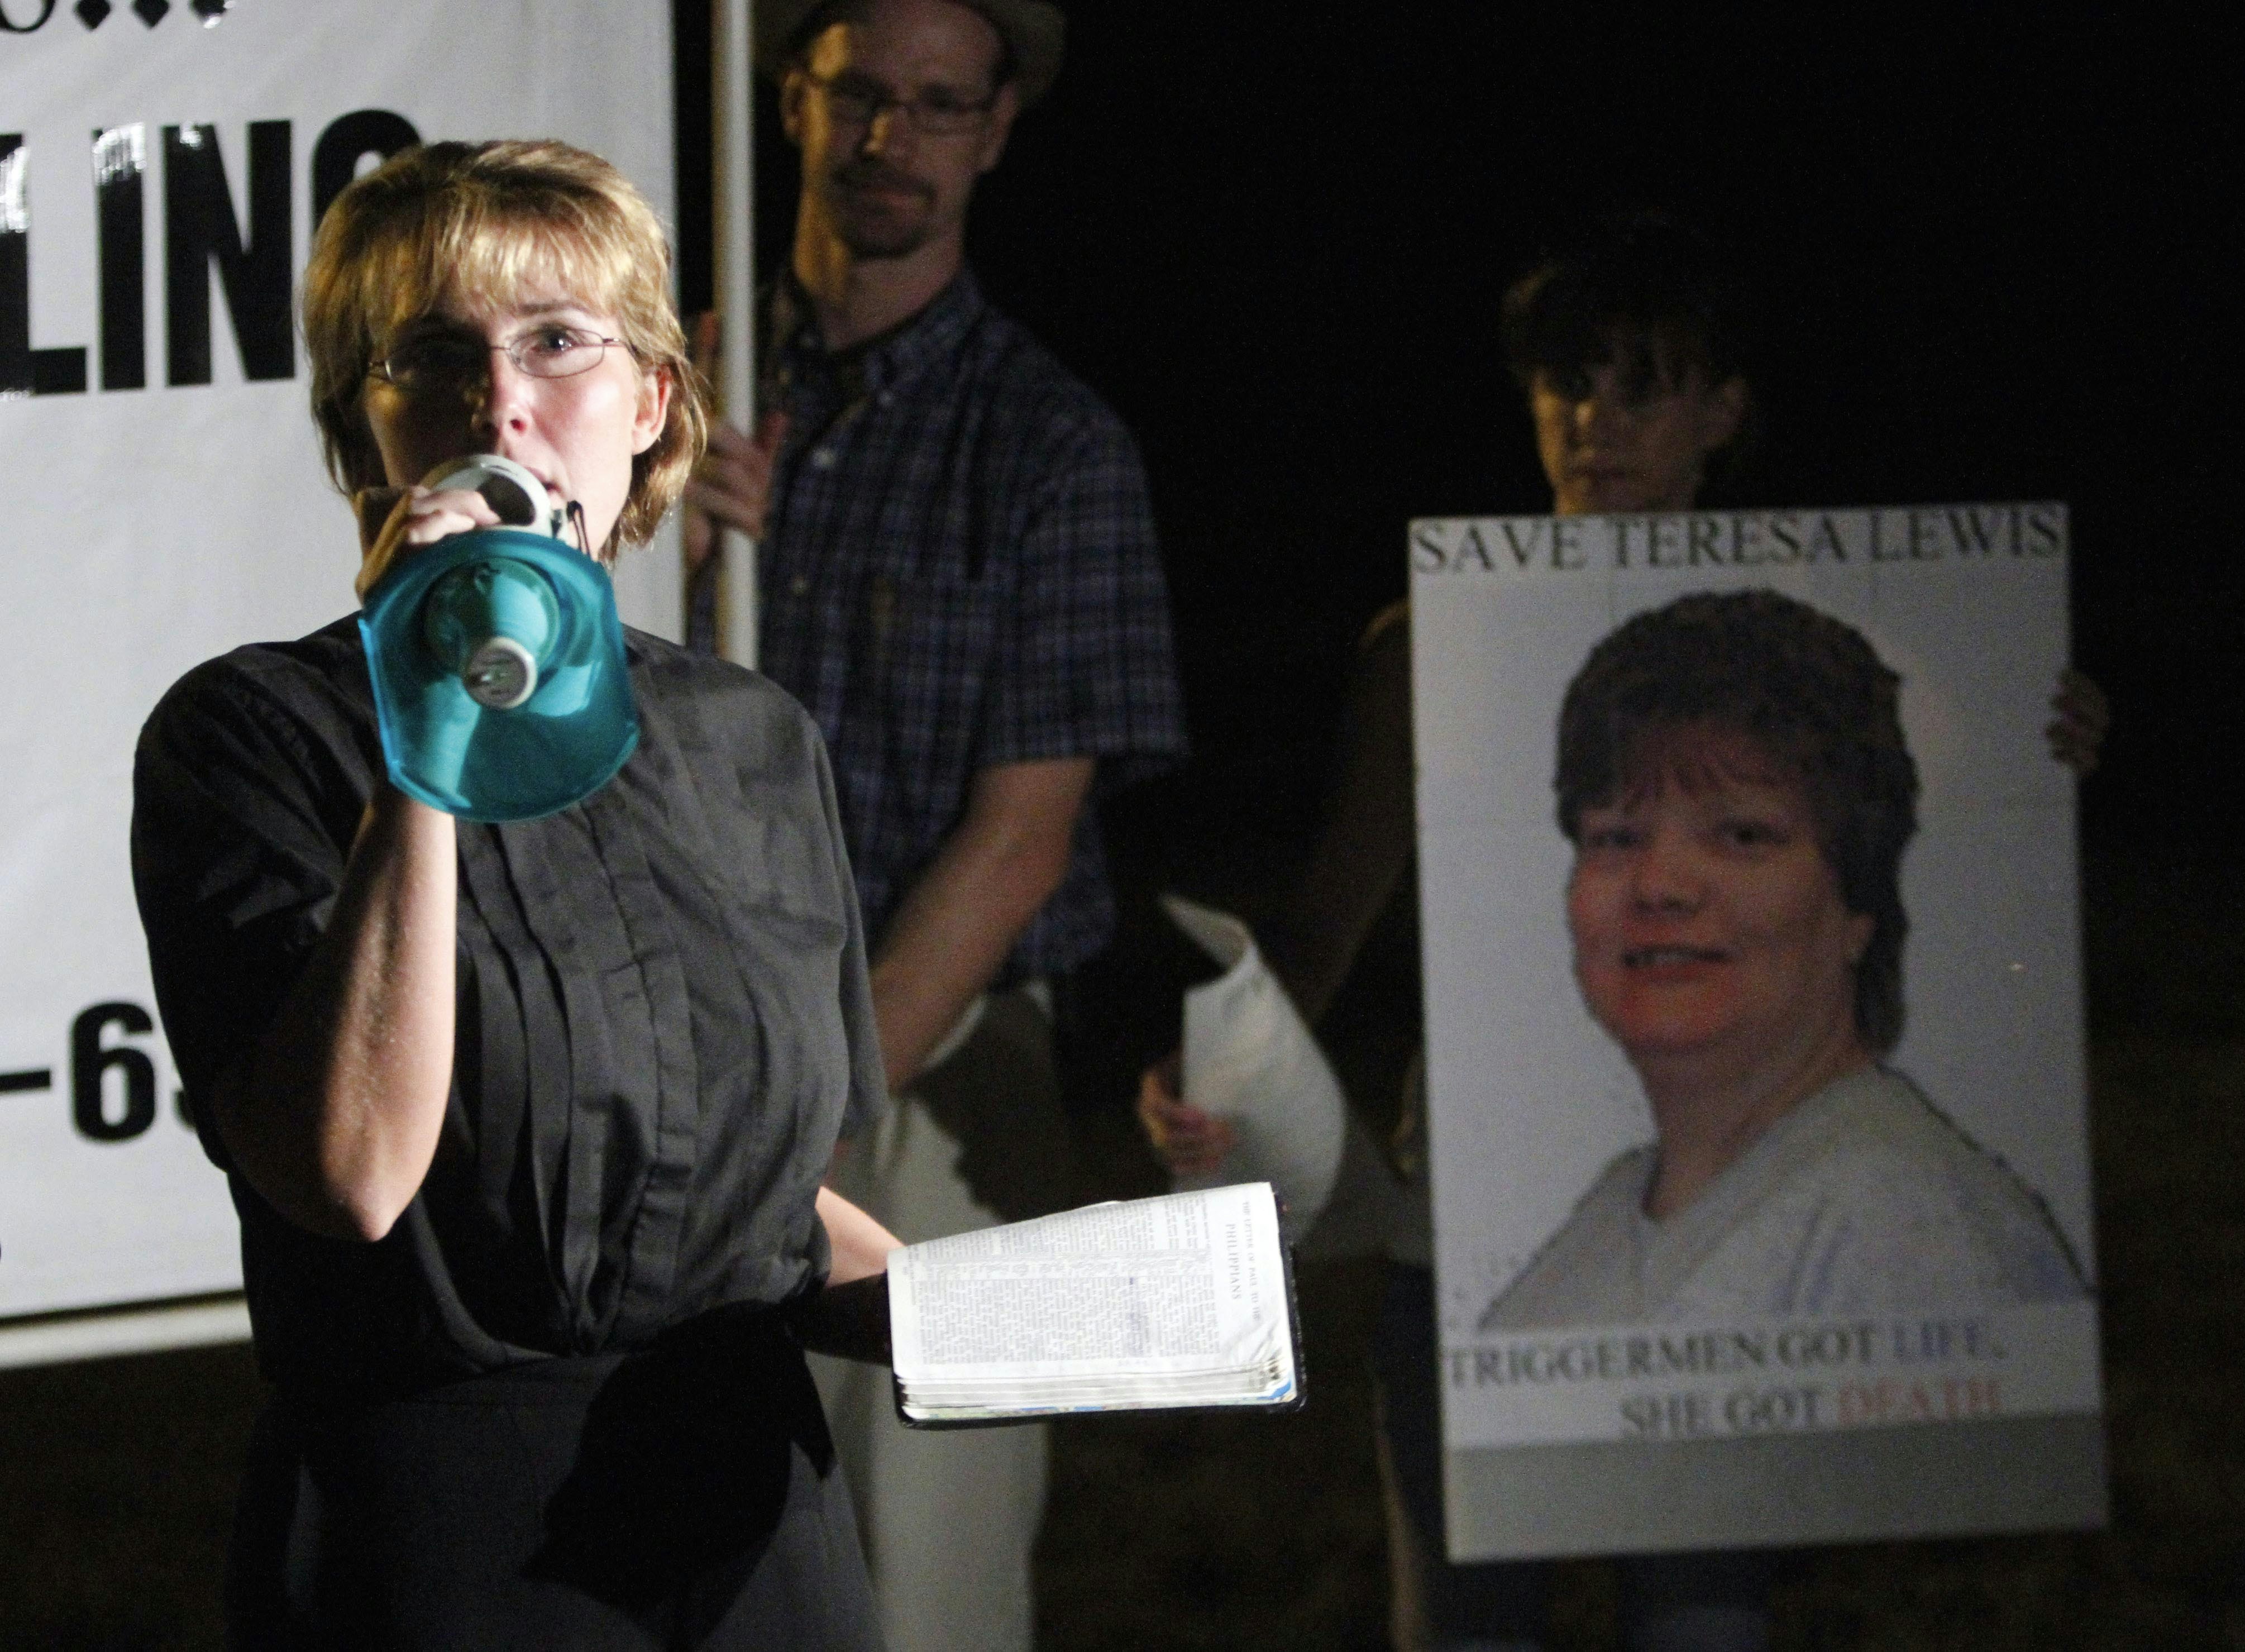 Death penalty protestor and former Fluvanna womens prison chaplain, Rev. Lynn Litchfield, reads a passage from the bible outside the Greensville Correctional Center in Jarratt, Va., on Sept. 23, 2010.